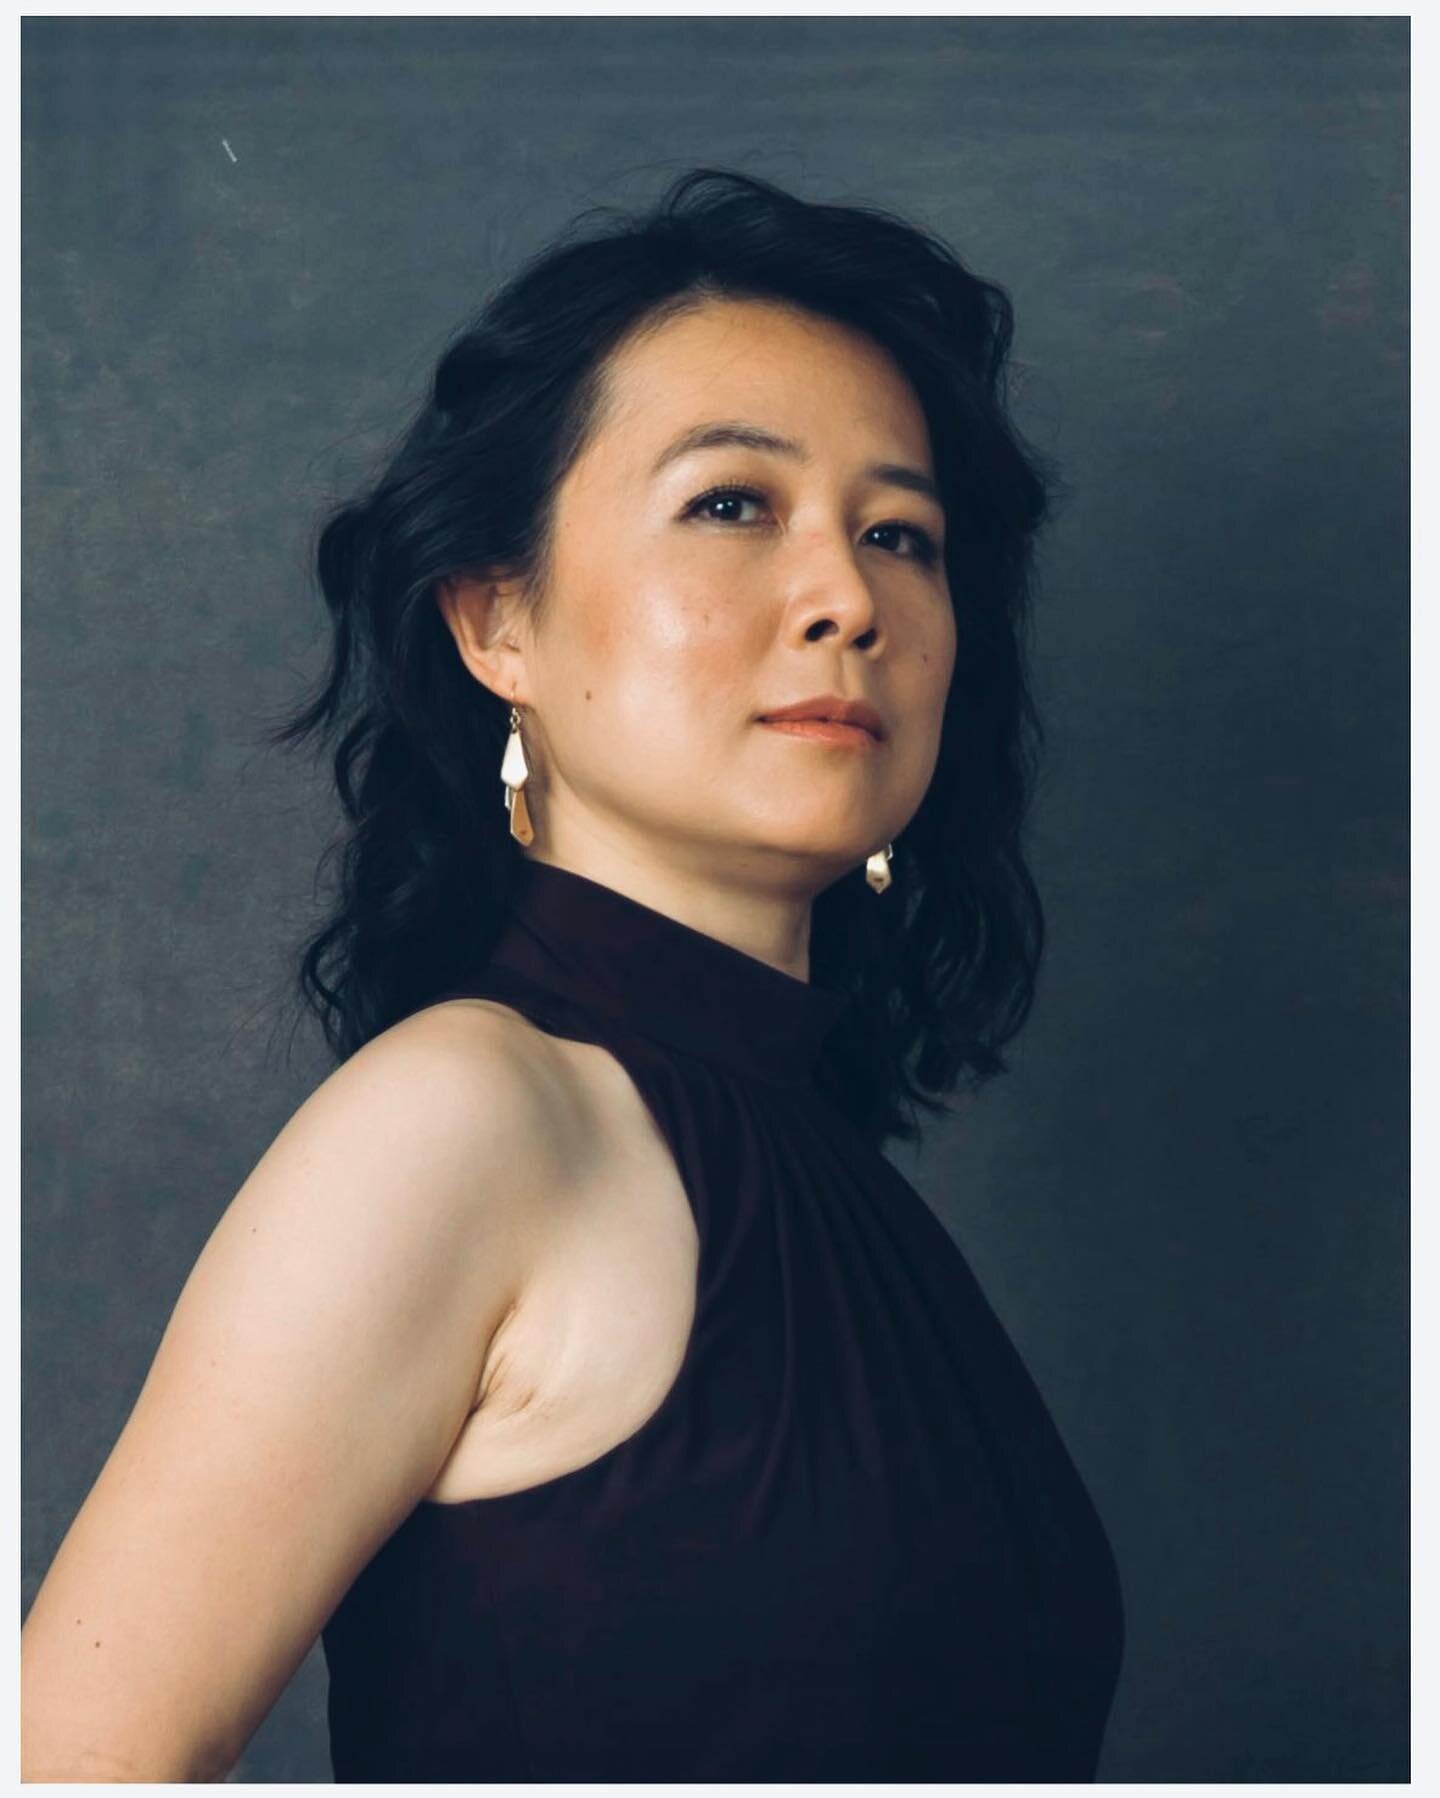 Merz Trio is delighted to introduce our new colleague, pianist (and talented visual artist!) Amy Yang.
.
We&rsquo;ve been long-time great admirers of Amy&rsquo;s beautifully distinctive musicianship and we&rsquo;re very honoured to have her join us. 